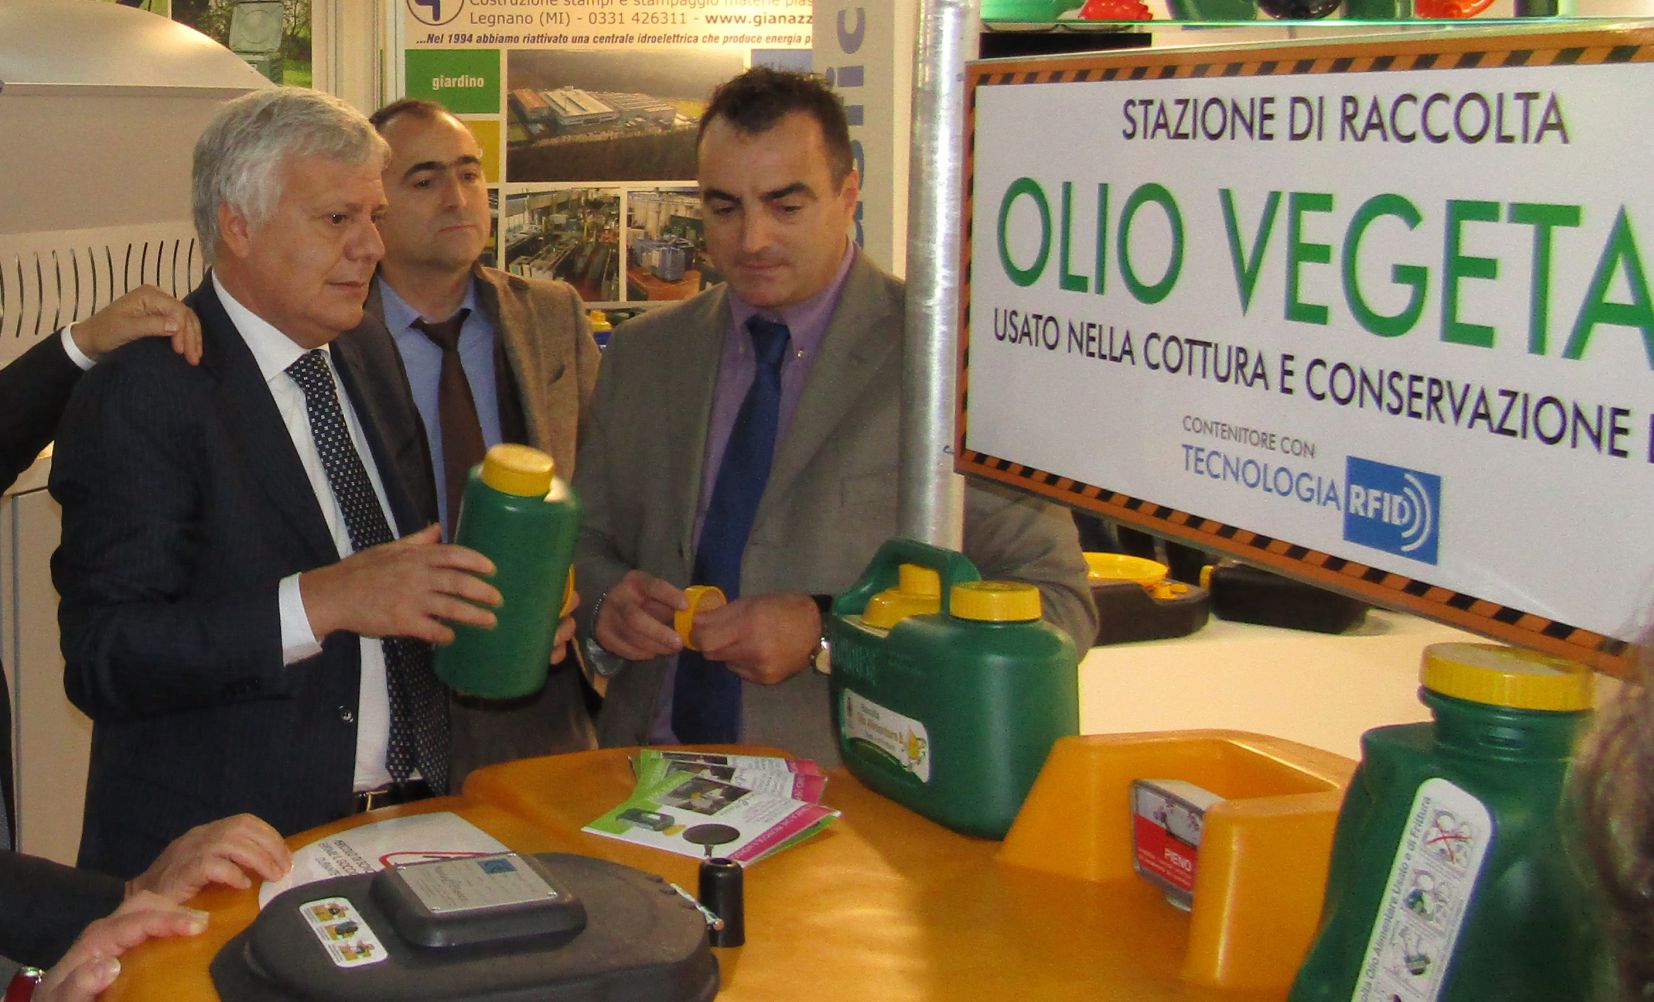 The Environment Minister Dr. Gian Luca Galletti visited the Nuova C.Plastica stand  during Ecomondo 2017